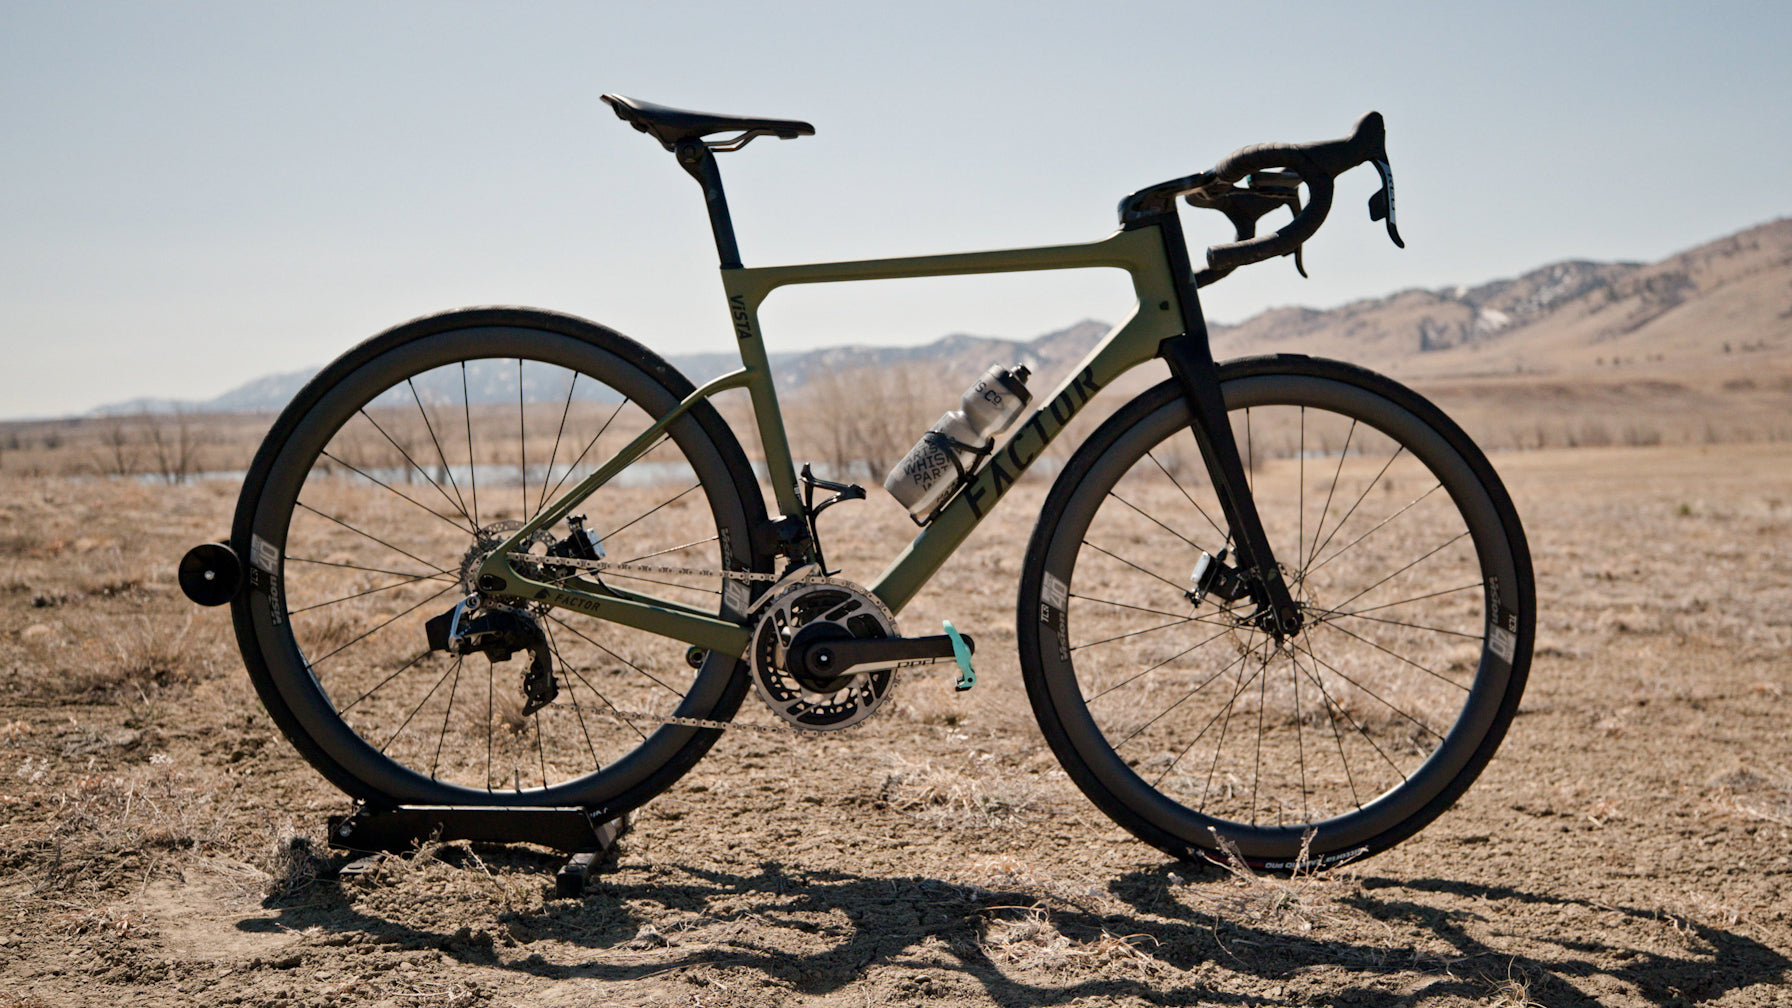 2020 Factor Vista review: The ultimate all-road bike